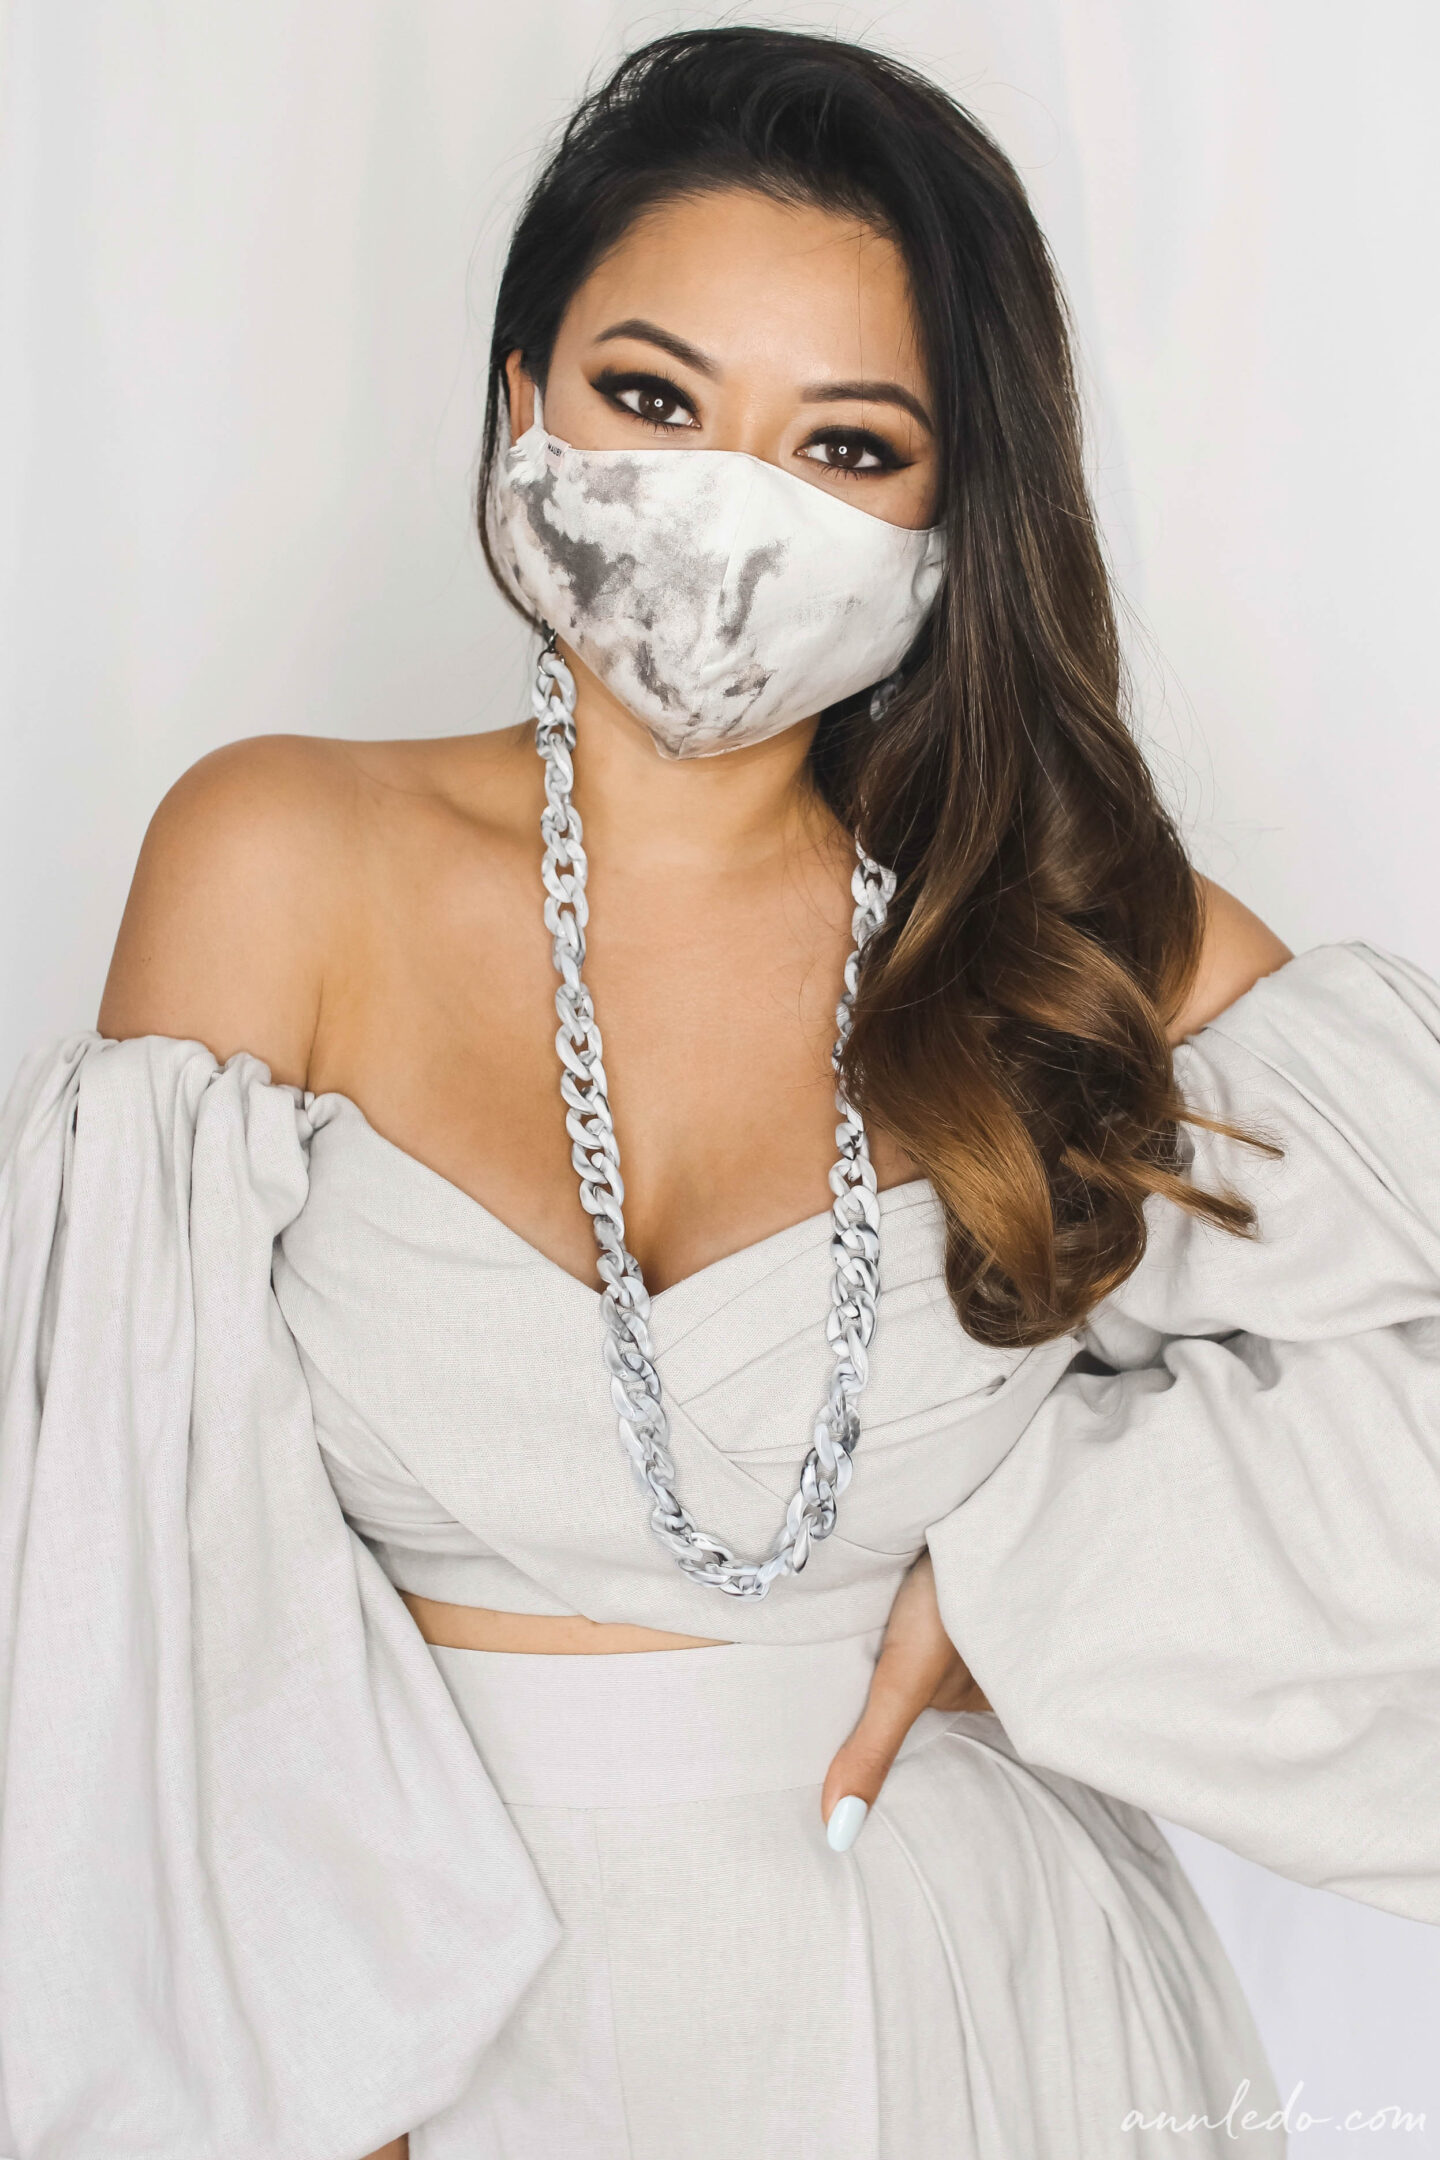 Chic Face Masks + Stylish Chain Accessories // Comfortable + Breathable Masks